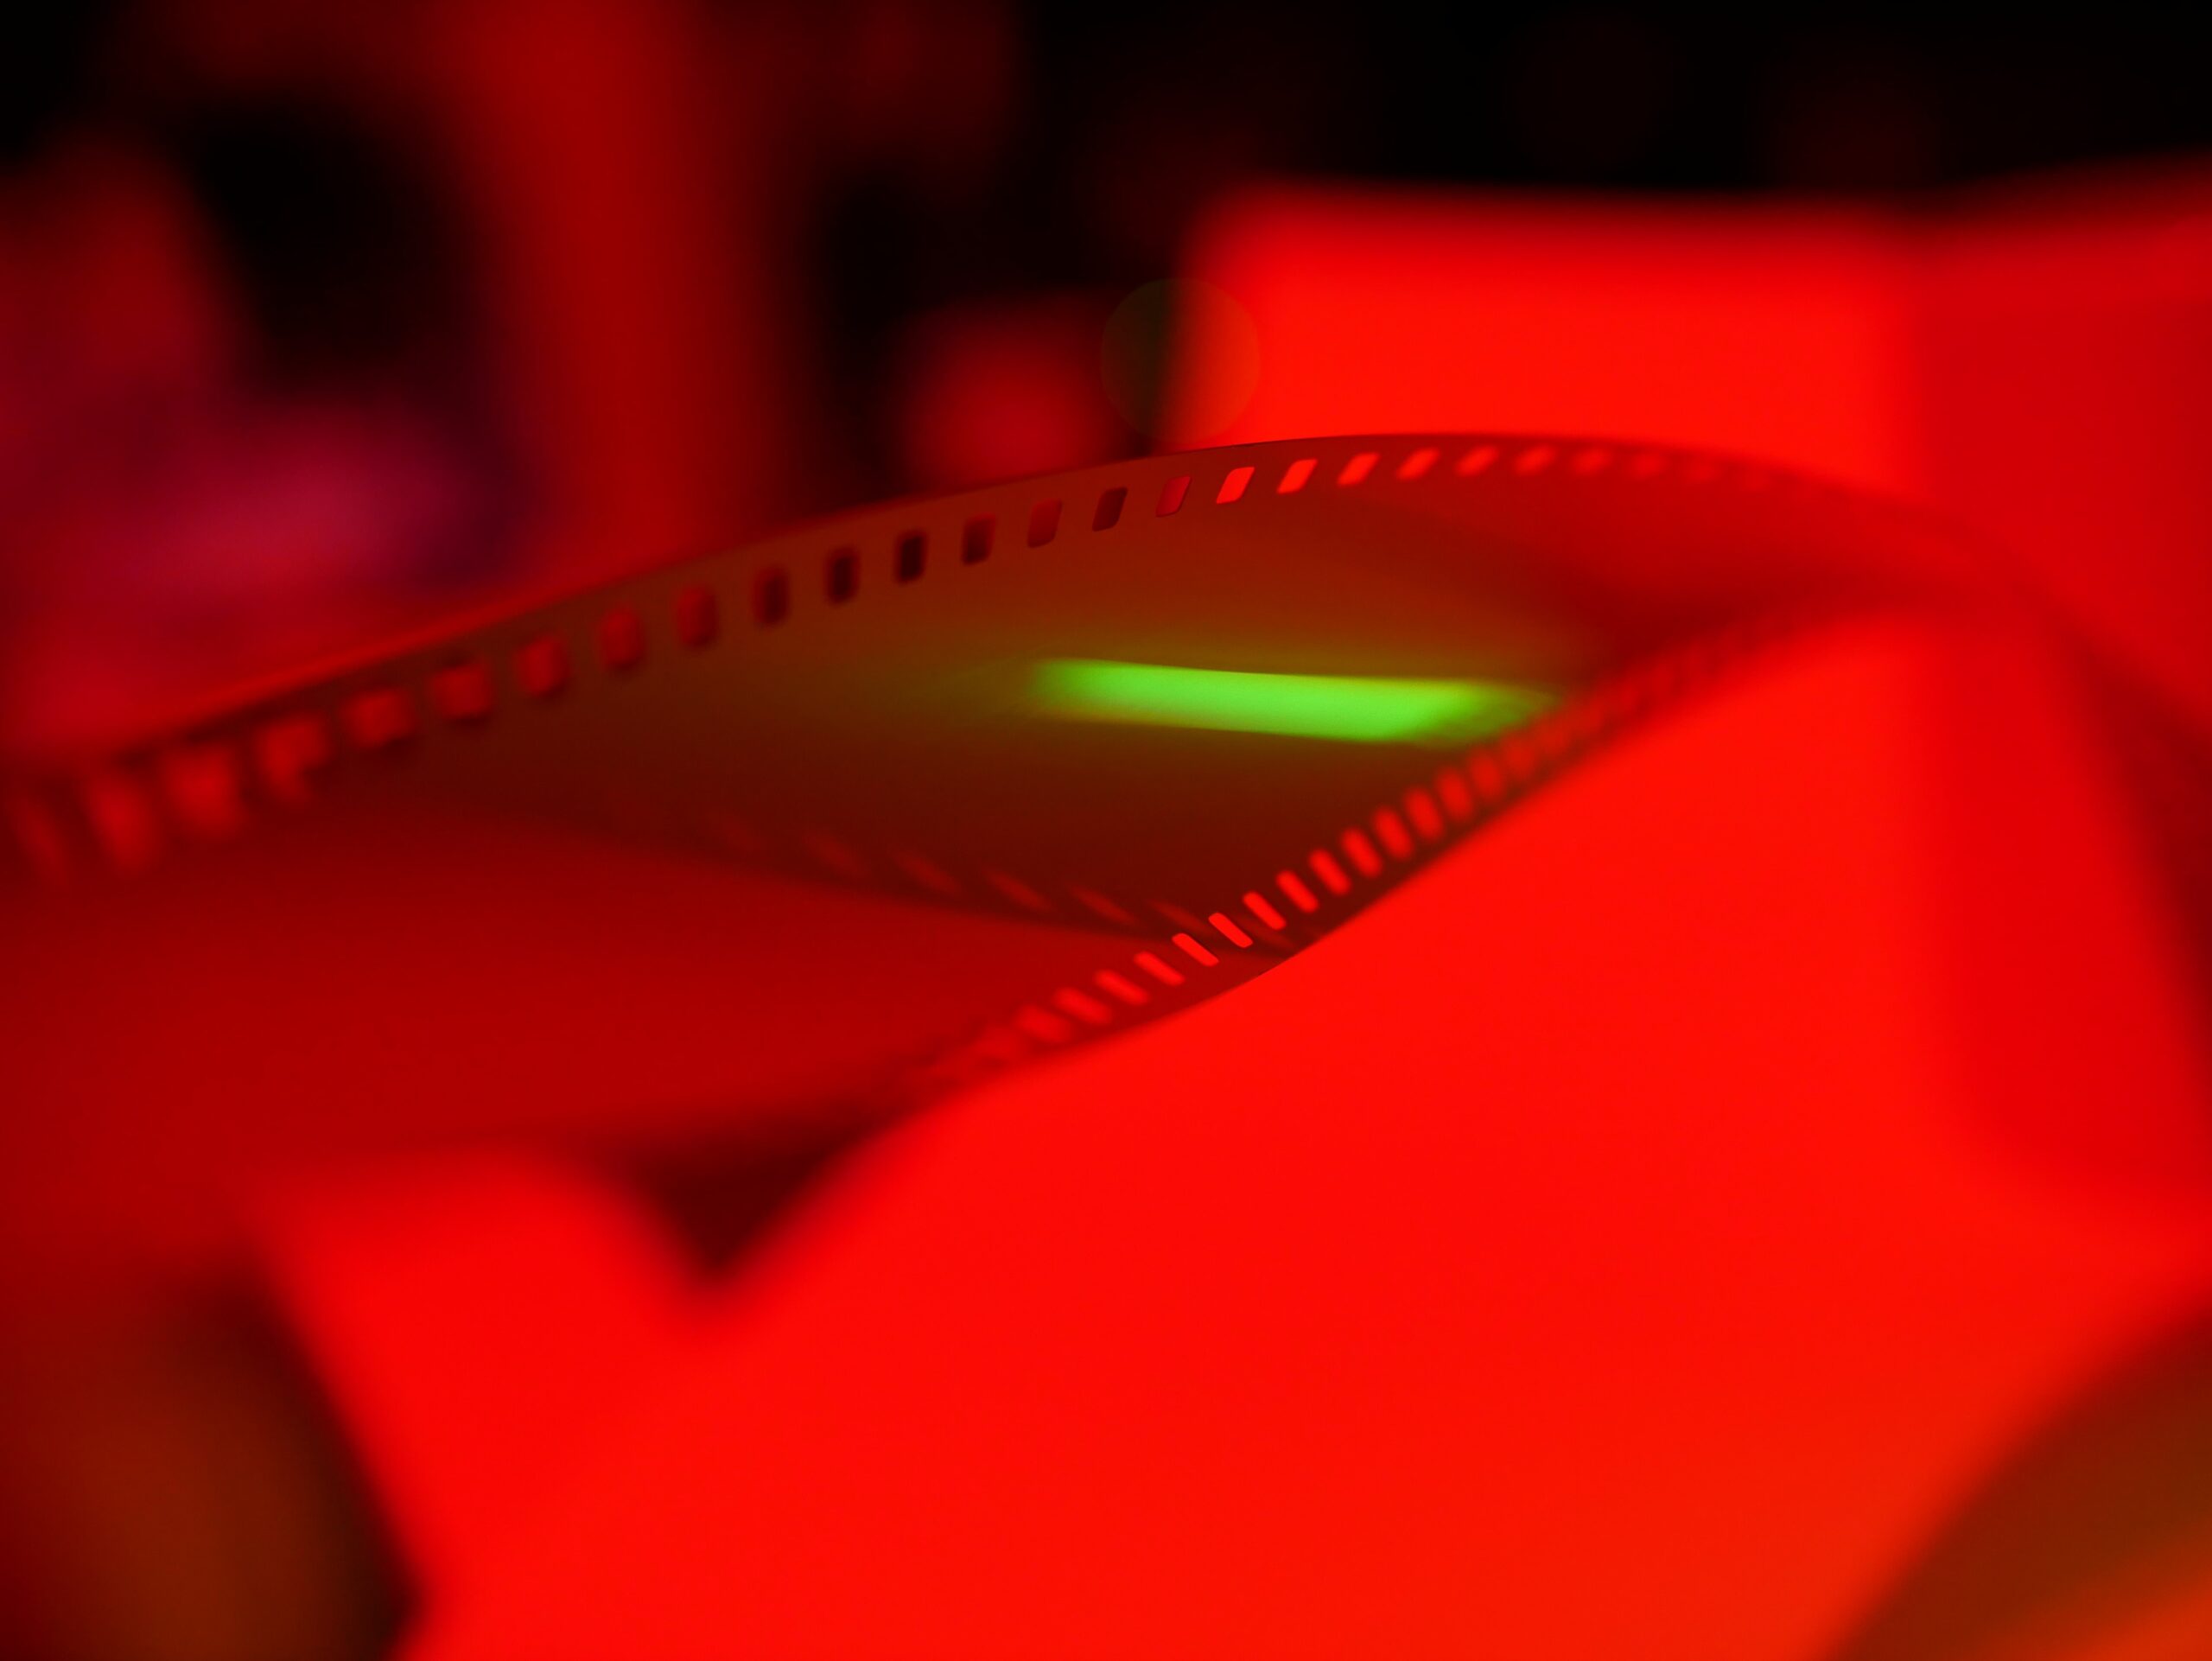 Film on a light table in a red, photo-developing dark room